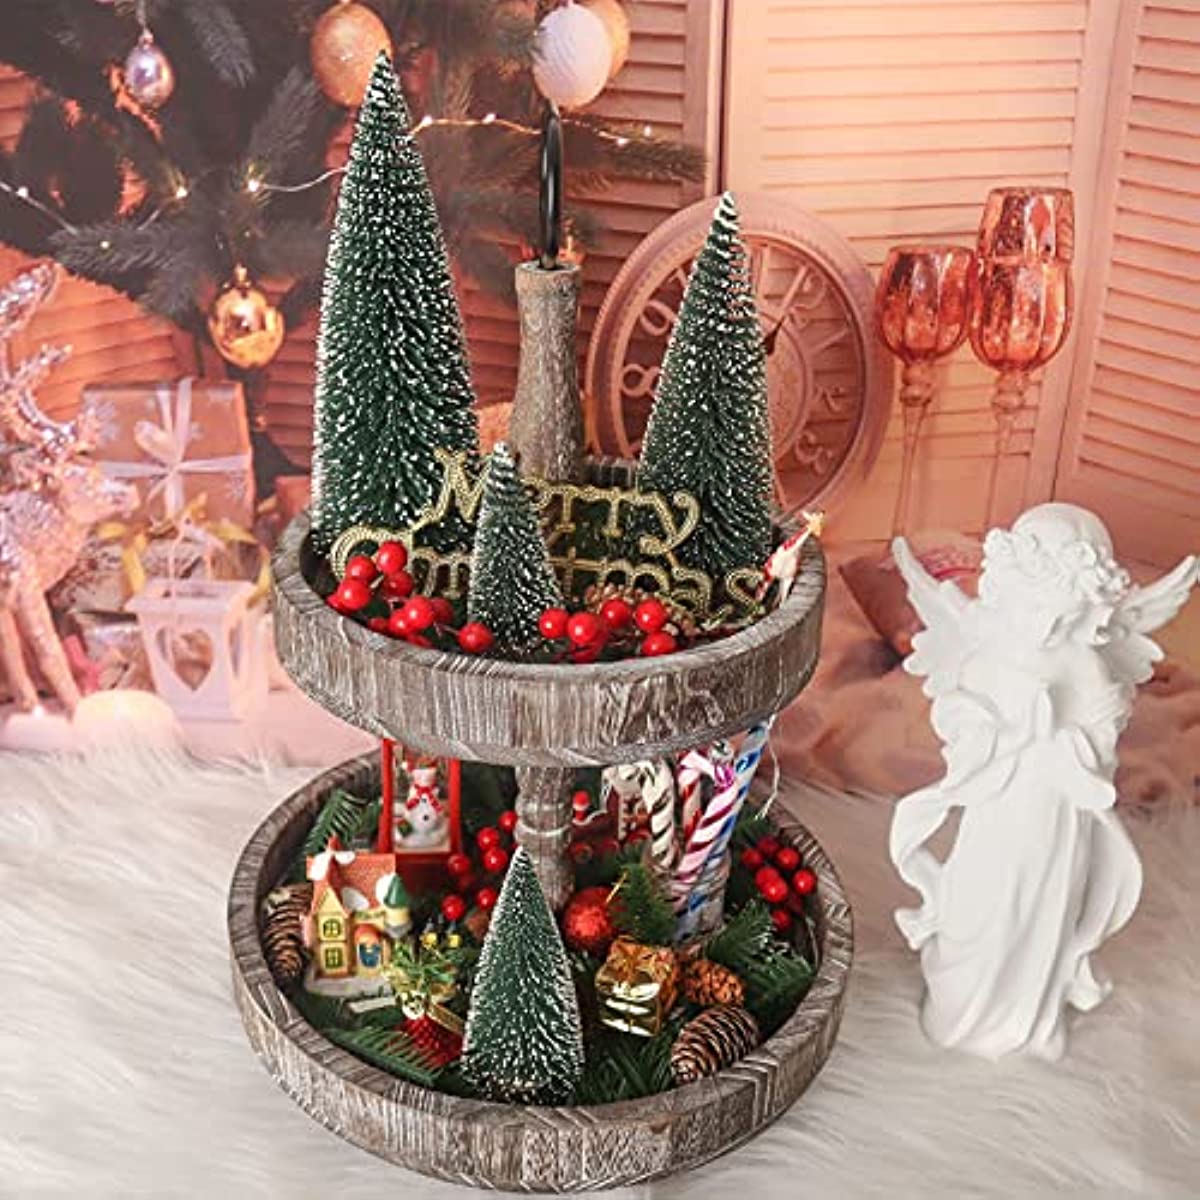 4pcs Mini Christmas Tree Small Pine Tree with Wooden Bases for Xmas Holiday Party Home Tabletop Tree Decor